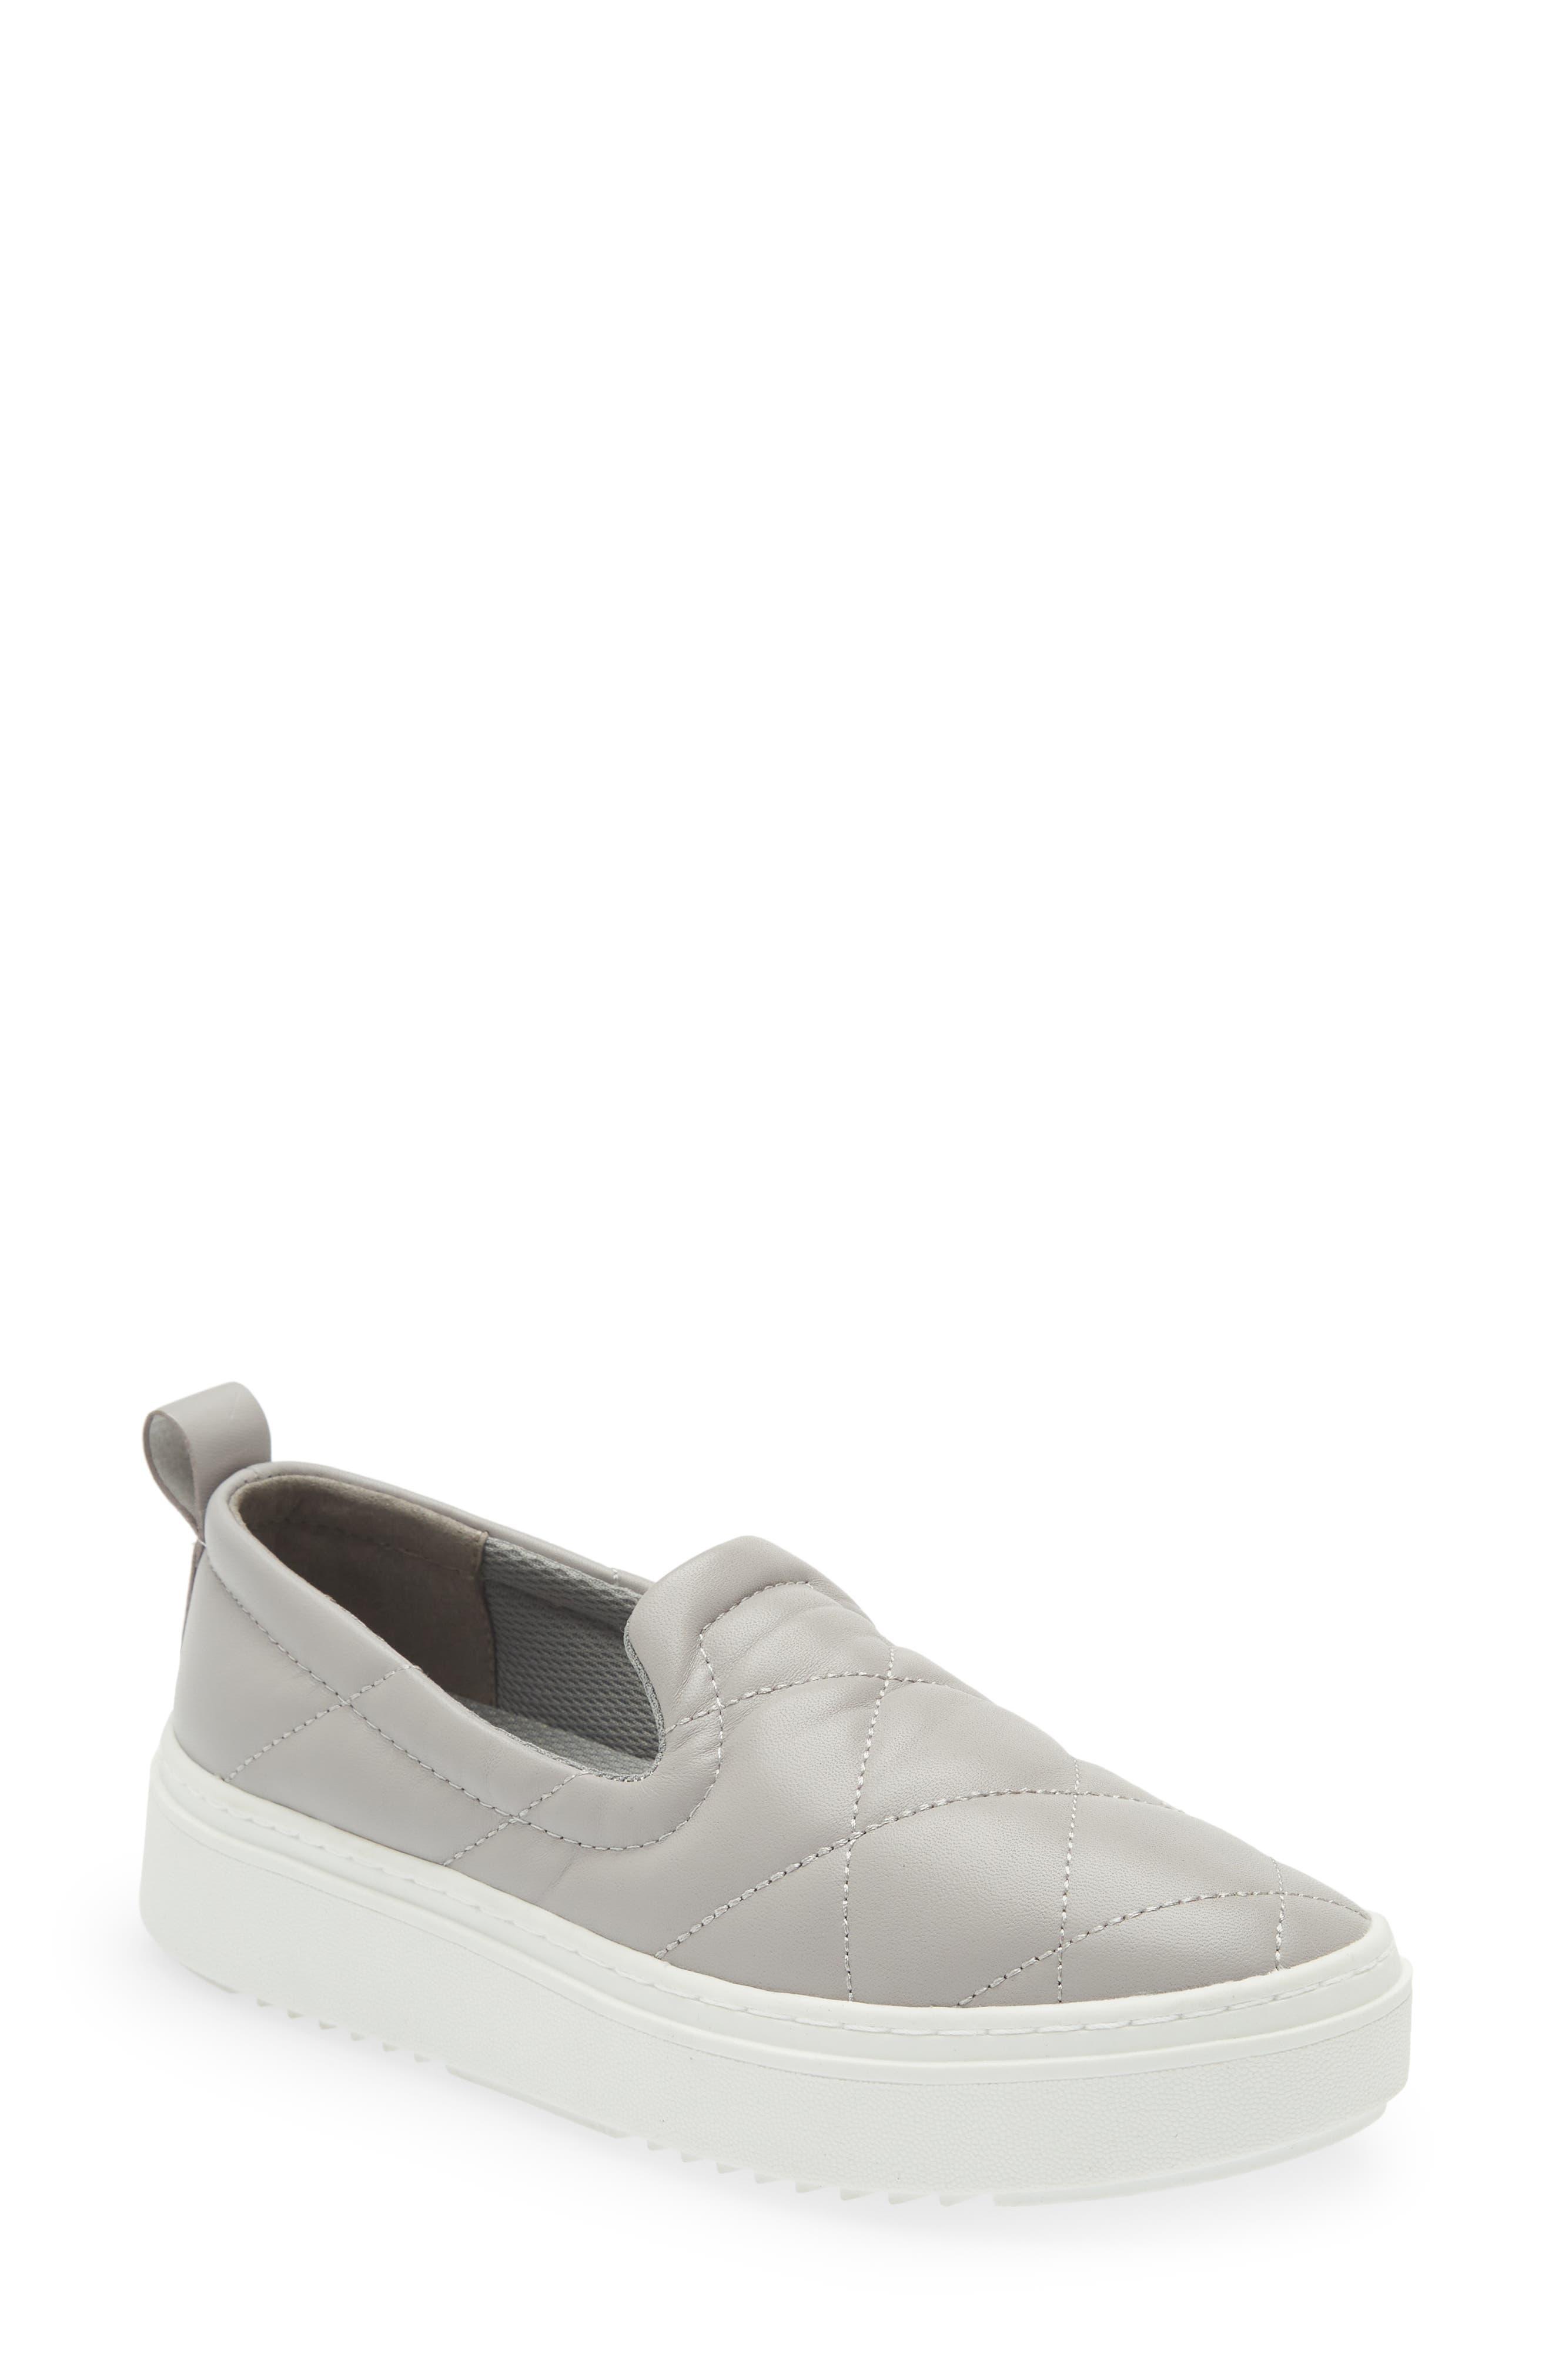 Eileen Fisher Poem Quilted Leather Slip-on Sneaker in White | Lyst